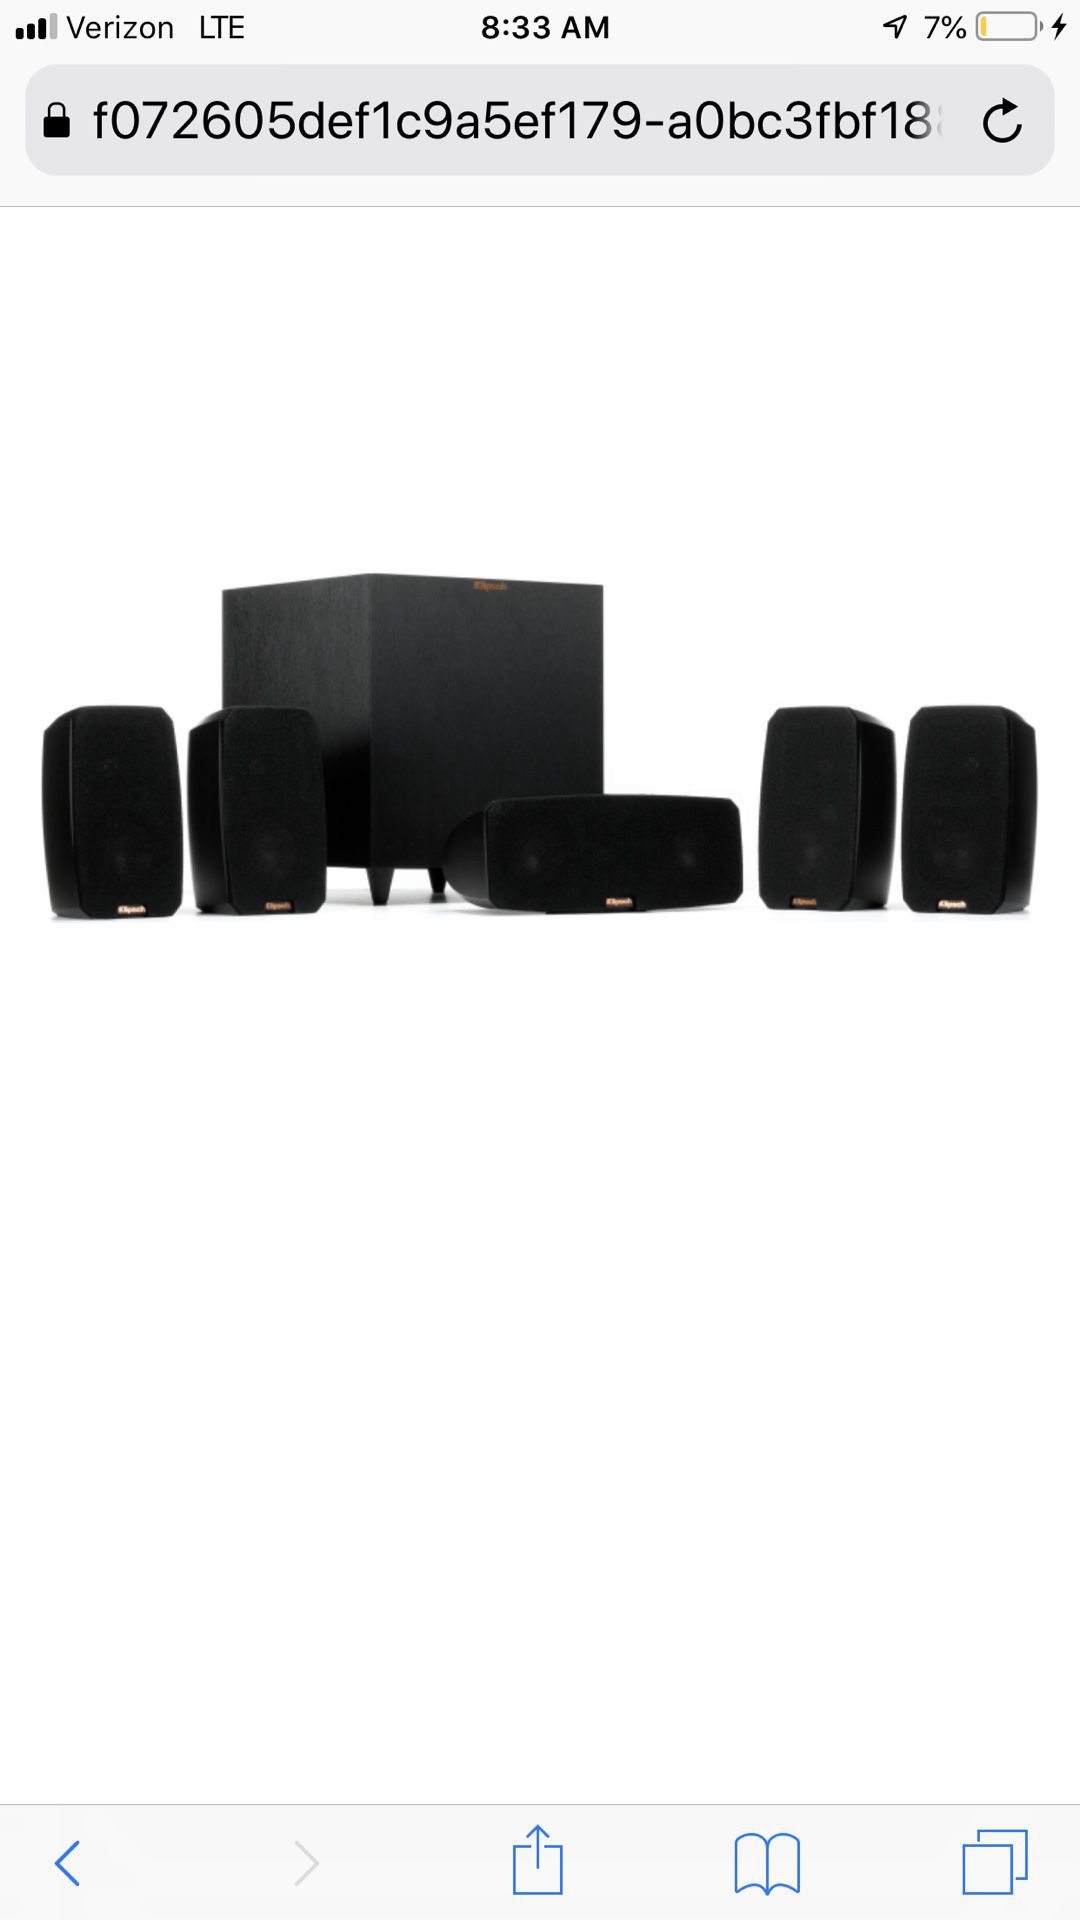 Klipsch reference home theatre package